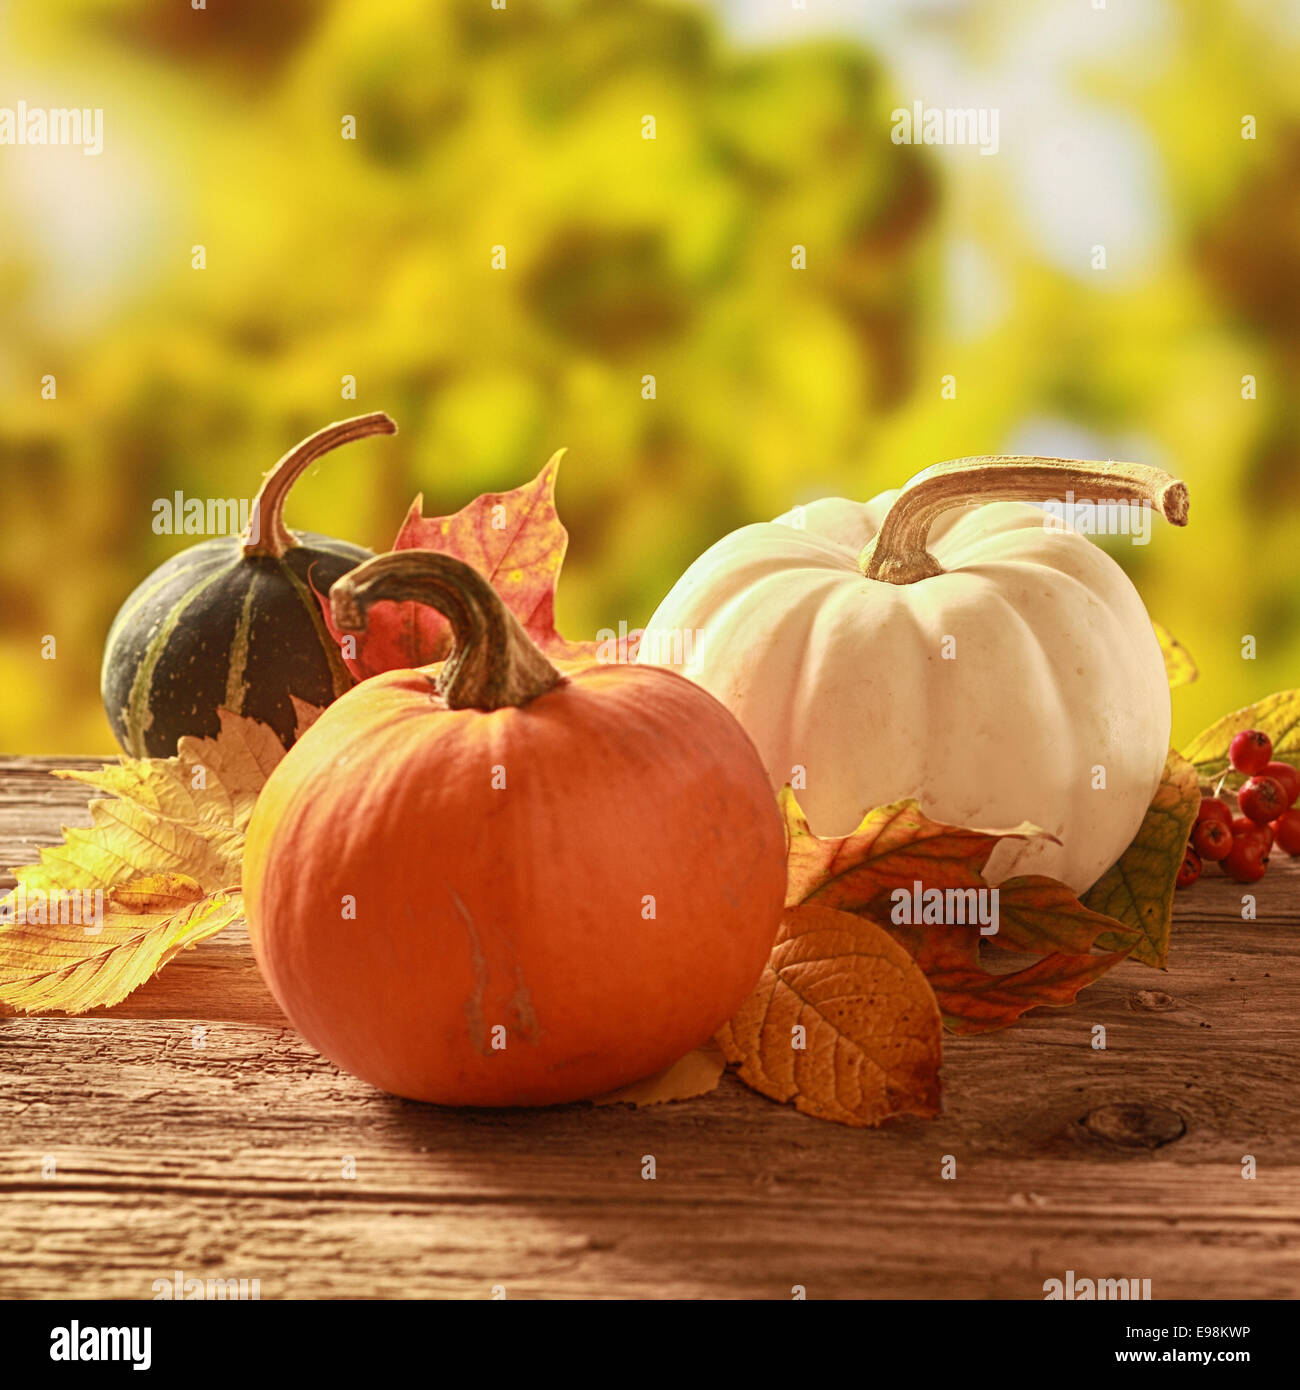 Three cucurbita squash and pumpkins in orange, white and variegated colors standing amongst colorful fallen autumn leaves on a rustic wooden table in a golden fall garden Stock Photo